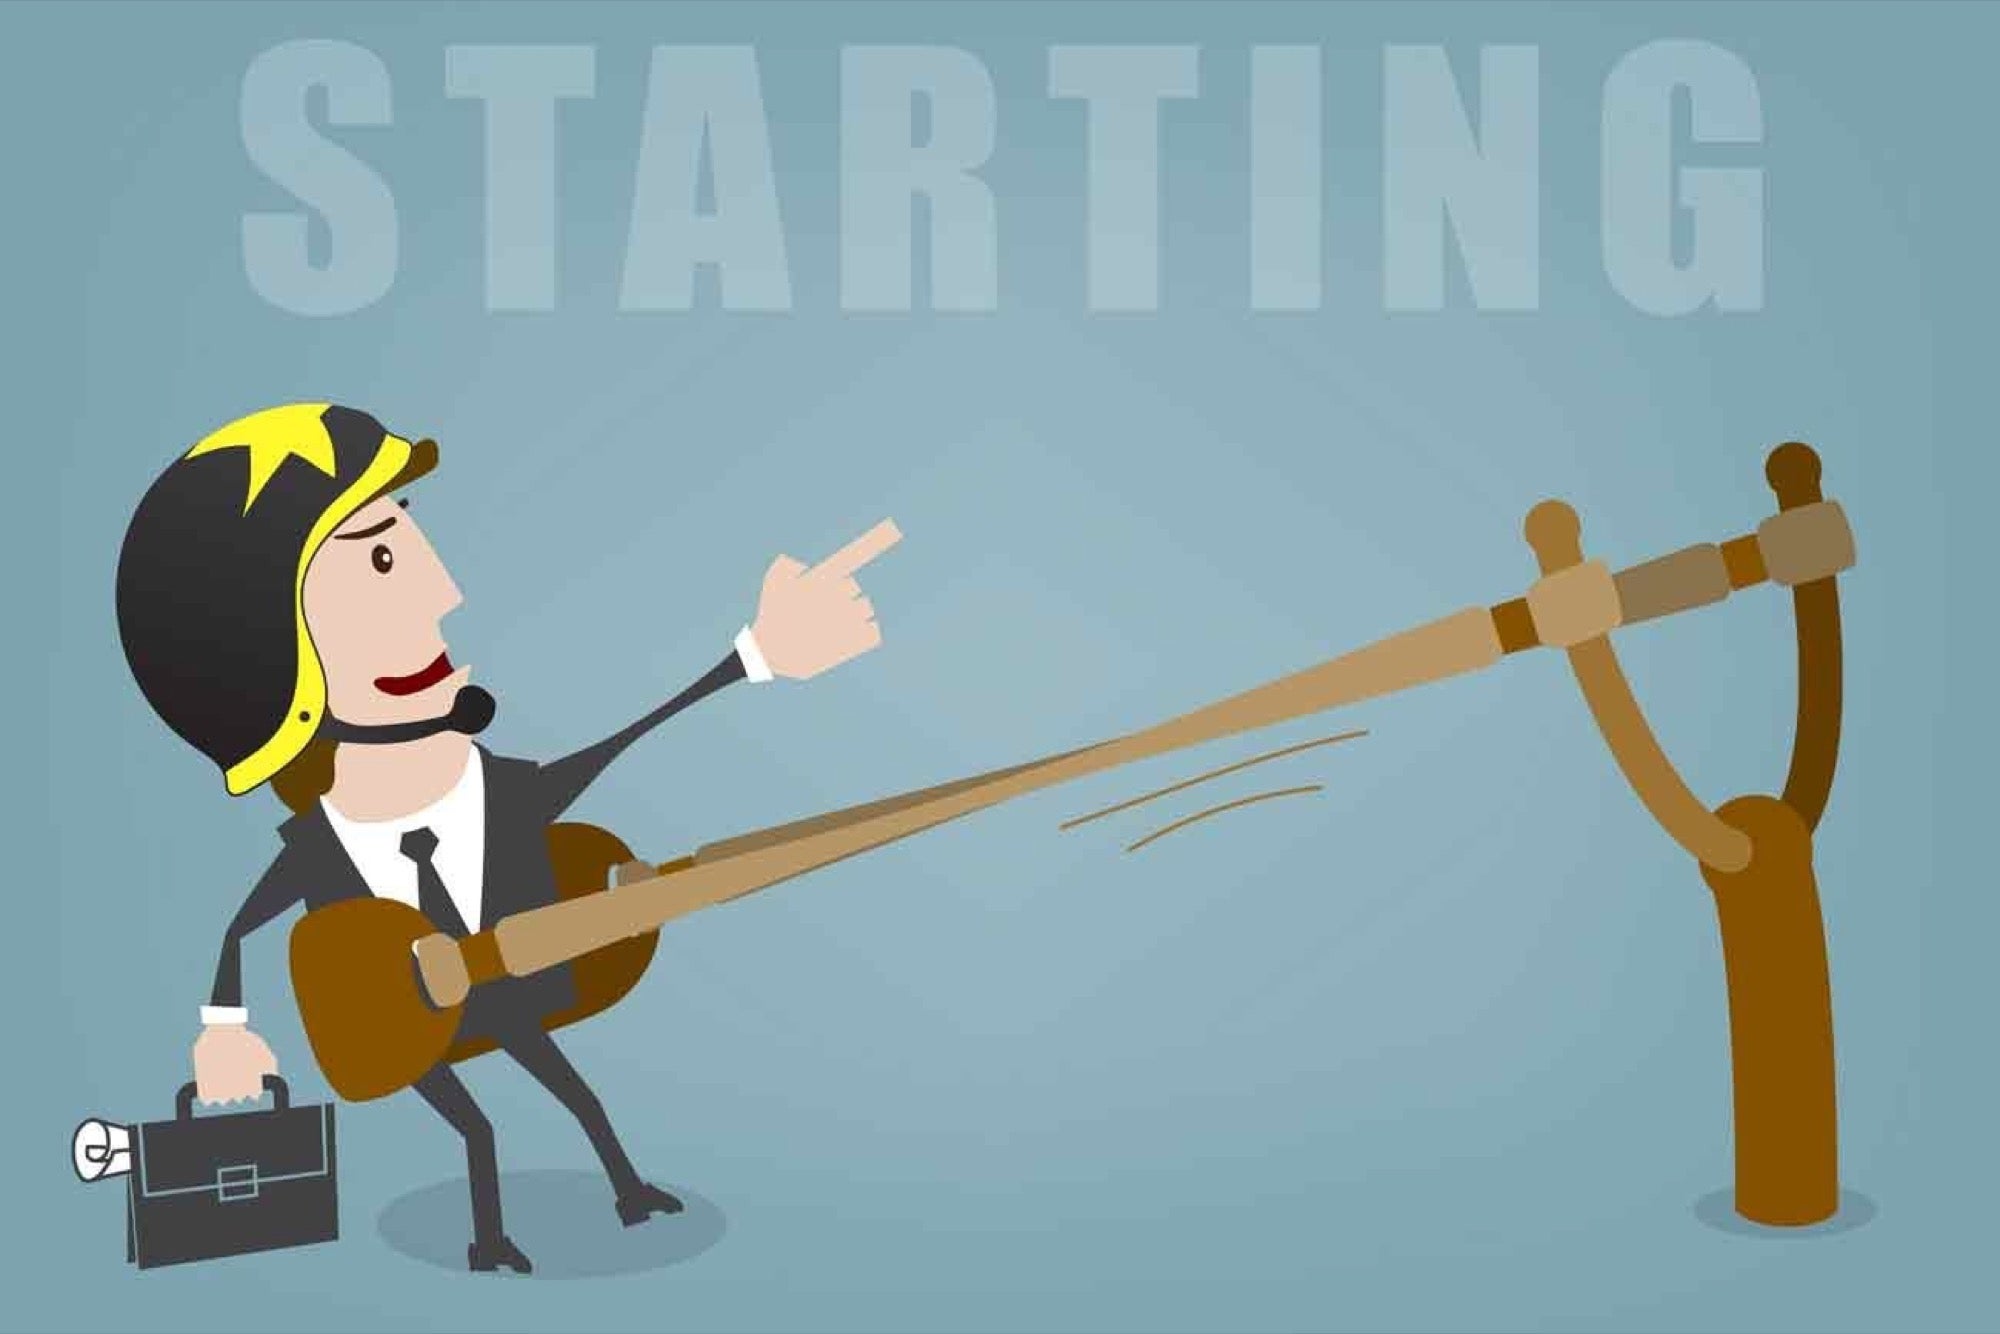 What is the first step for starting a business